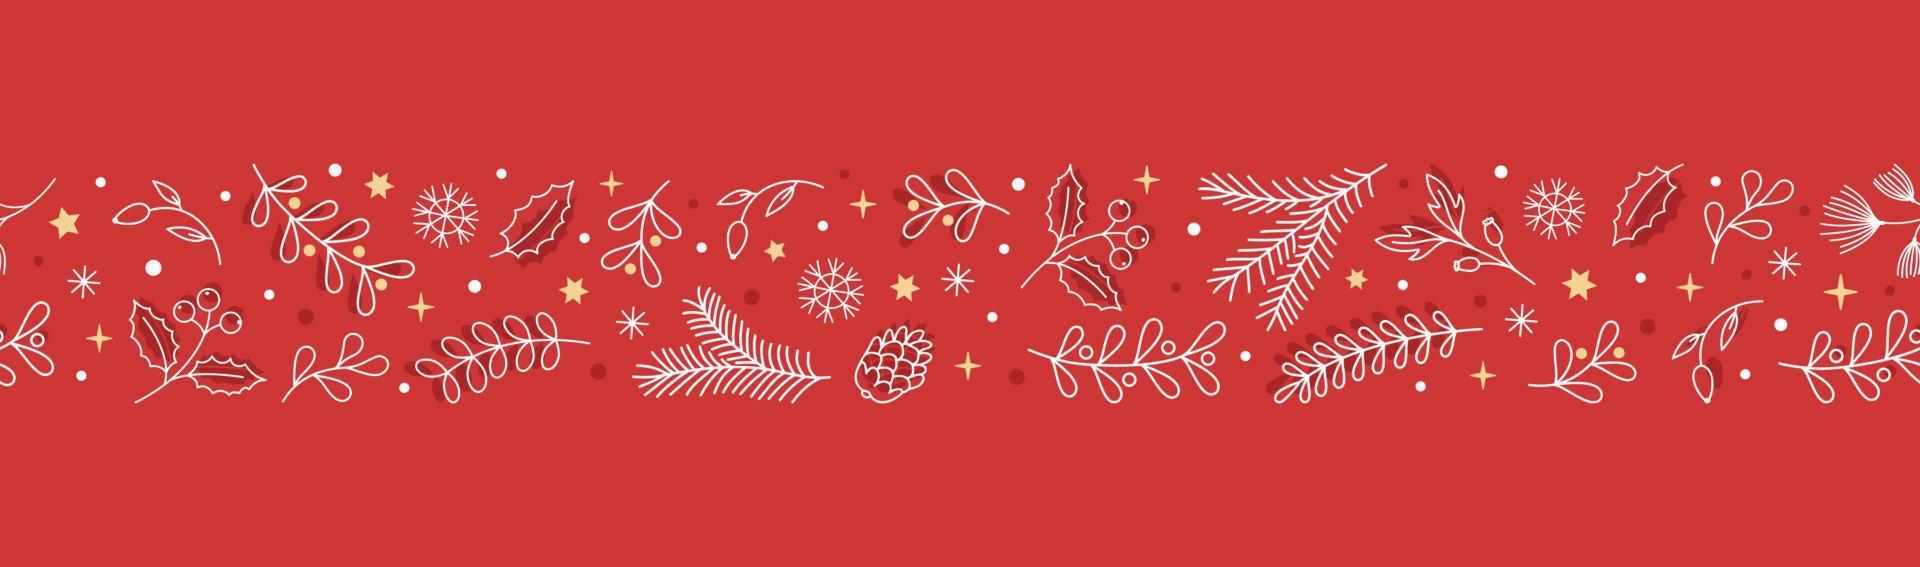 Festive hand drawn horizontal seamless border with winter branches, holly, mistletoe, snowflakes, berries. Red background. Christmas design, great for decorations, prints, postcards. vector